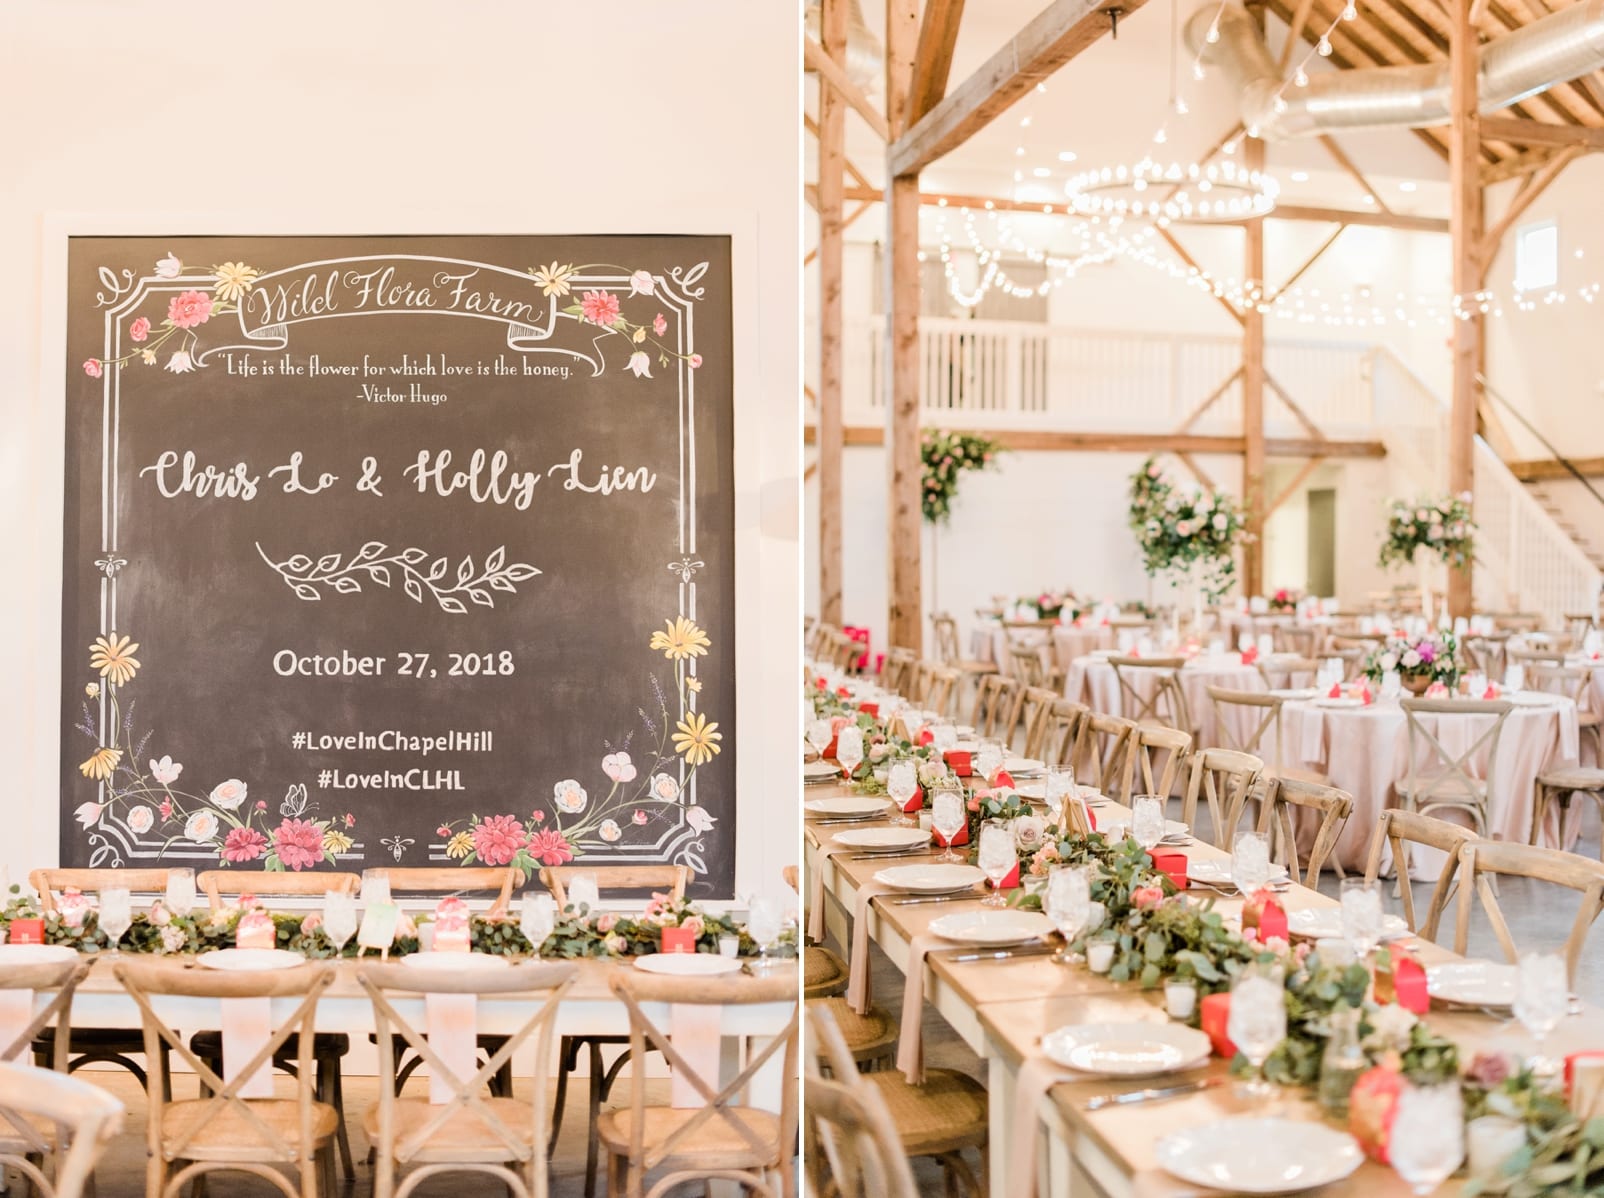 Barn of Chapel hill barn wall with large chalkboard floral drawing with bride and groom names photo